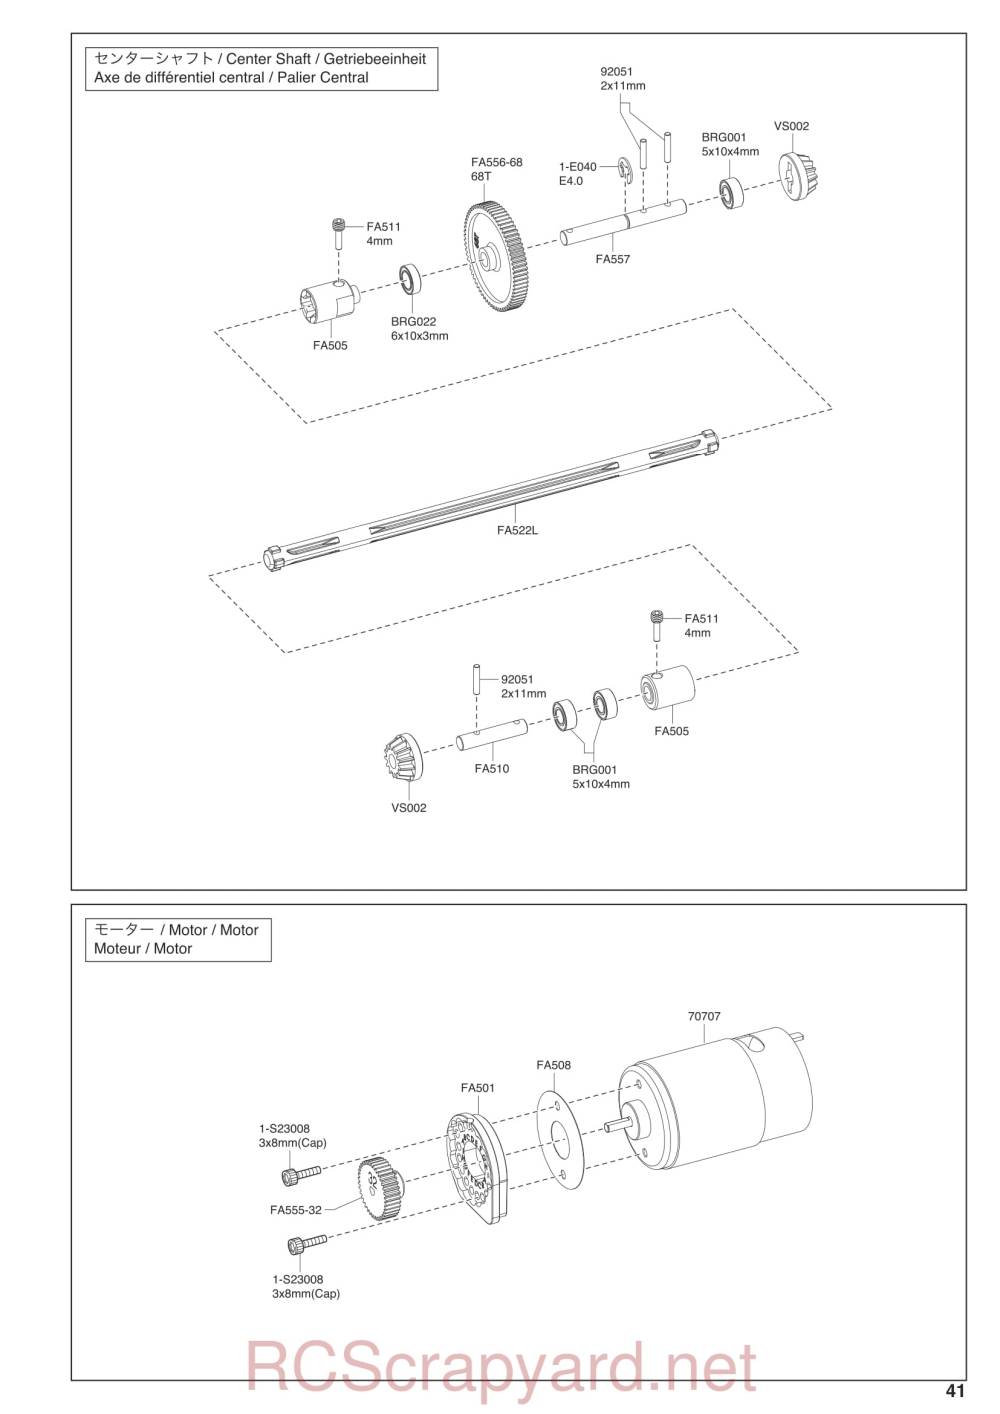 Kyosho EP Fazer Mk2 - Exploded View - Page 4